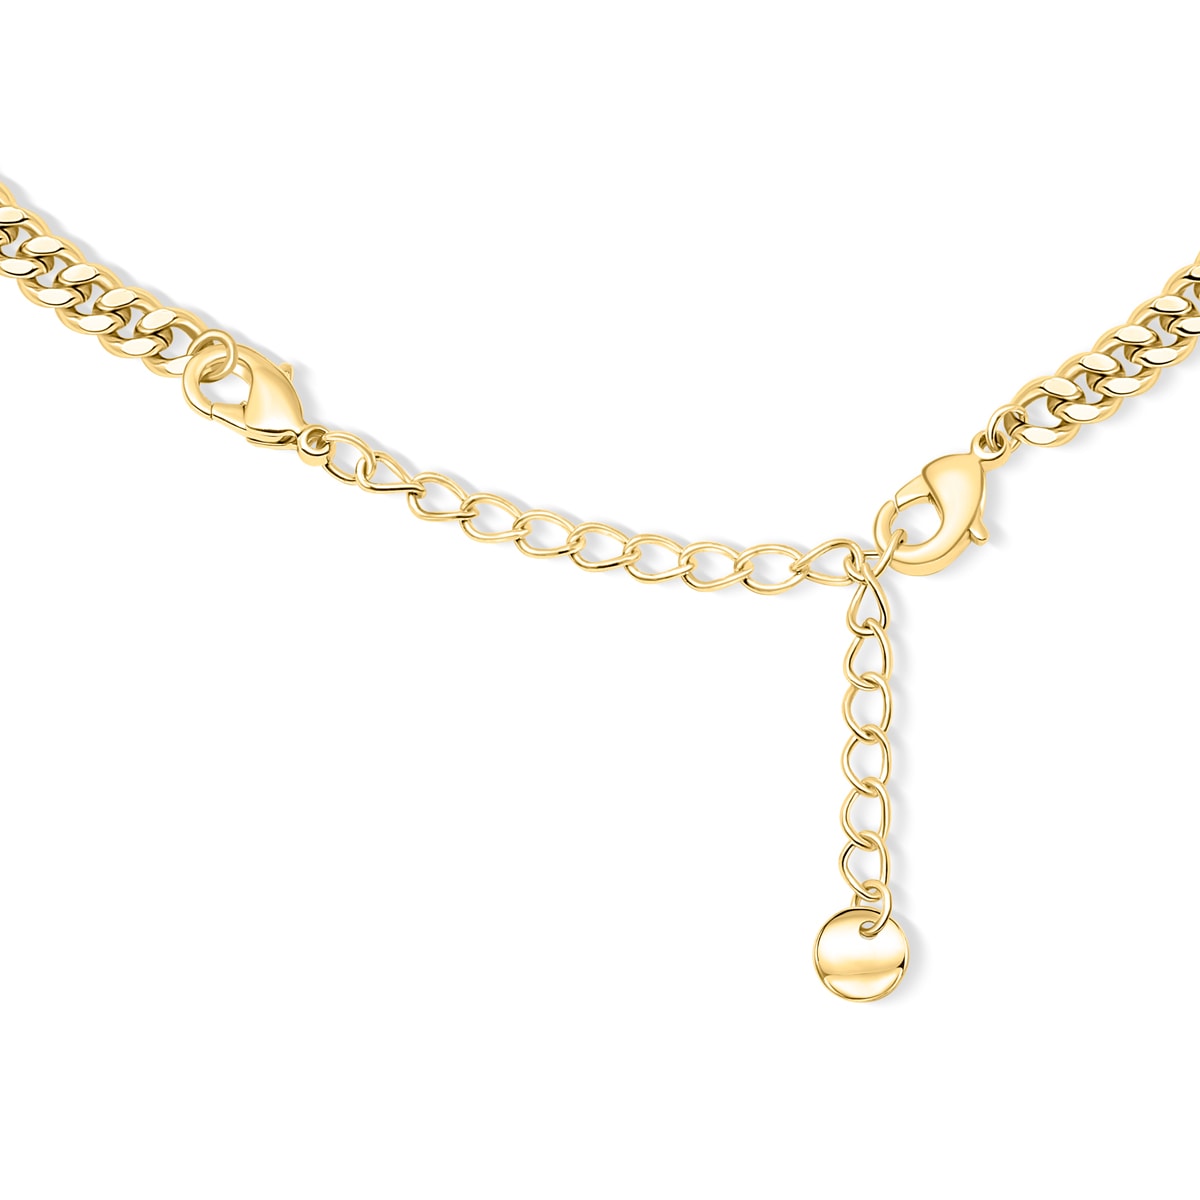 Affordable gold chain necklace